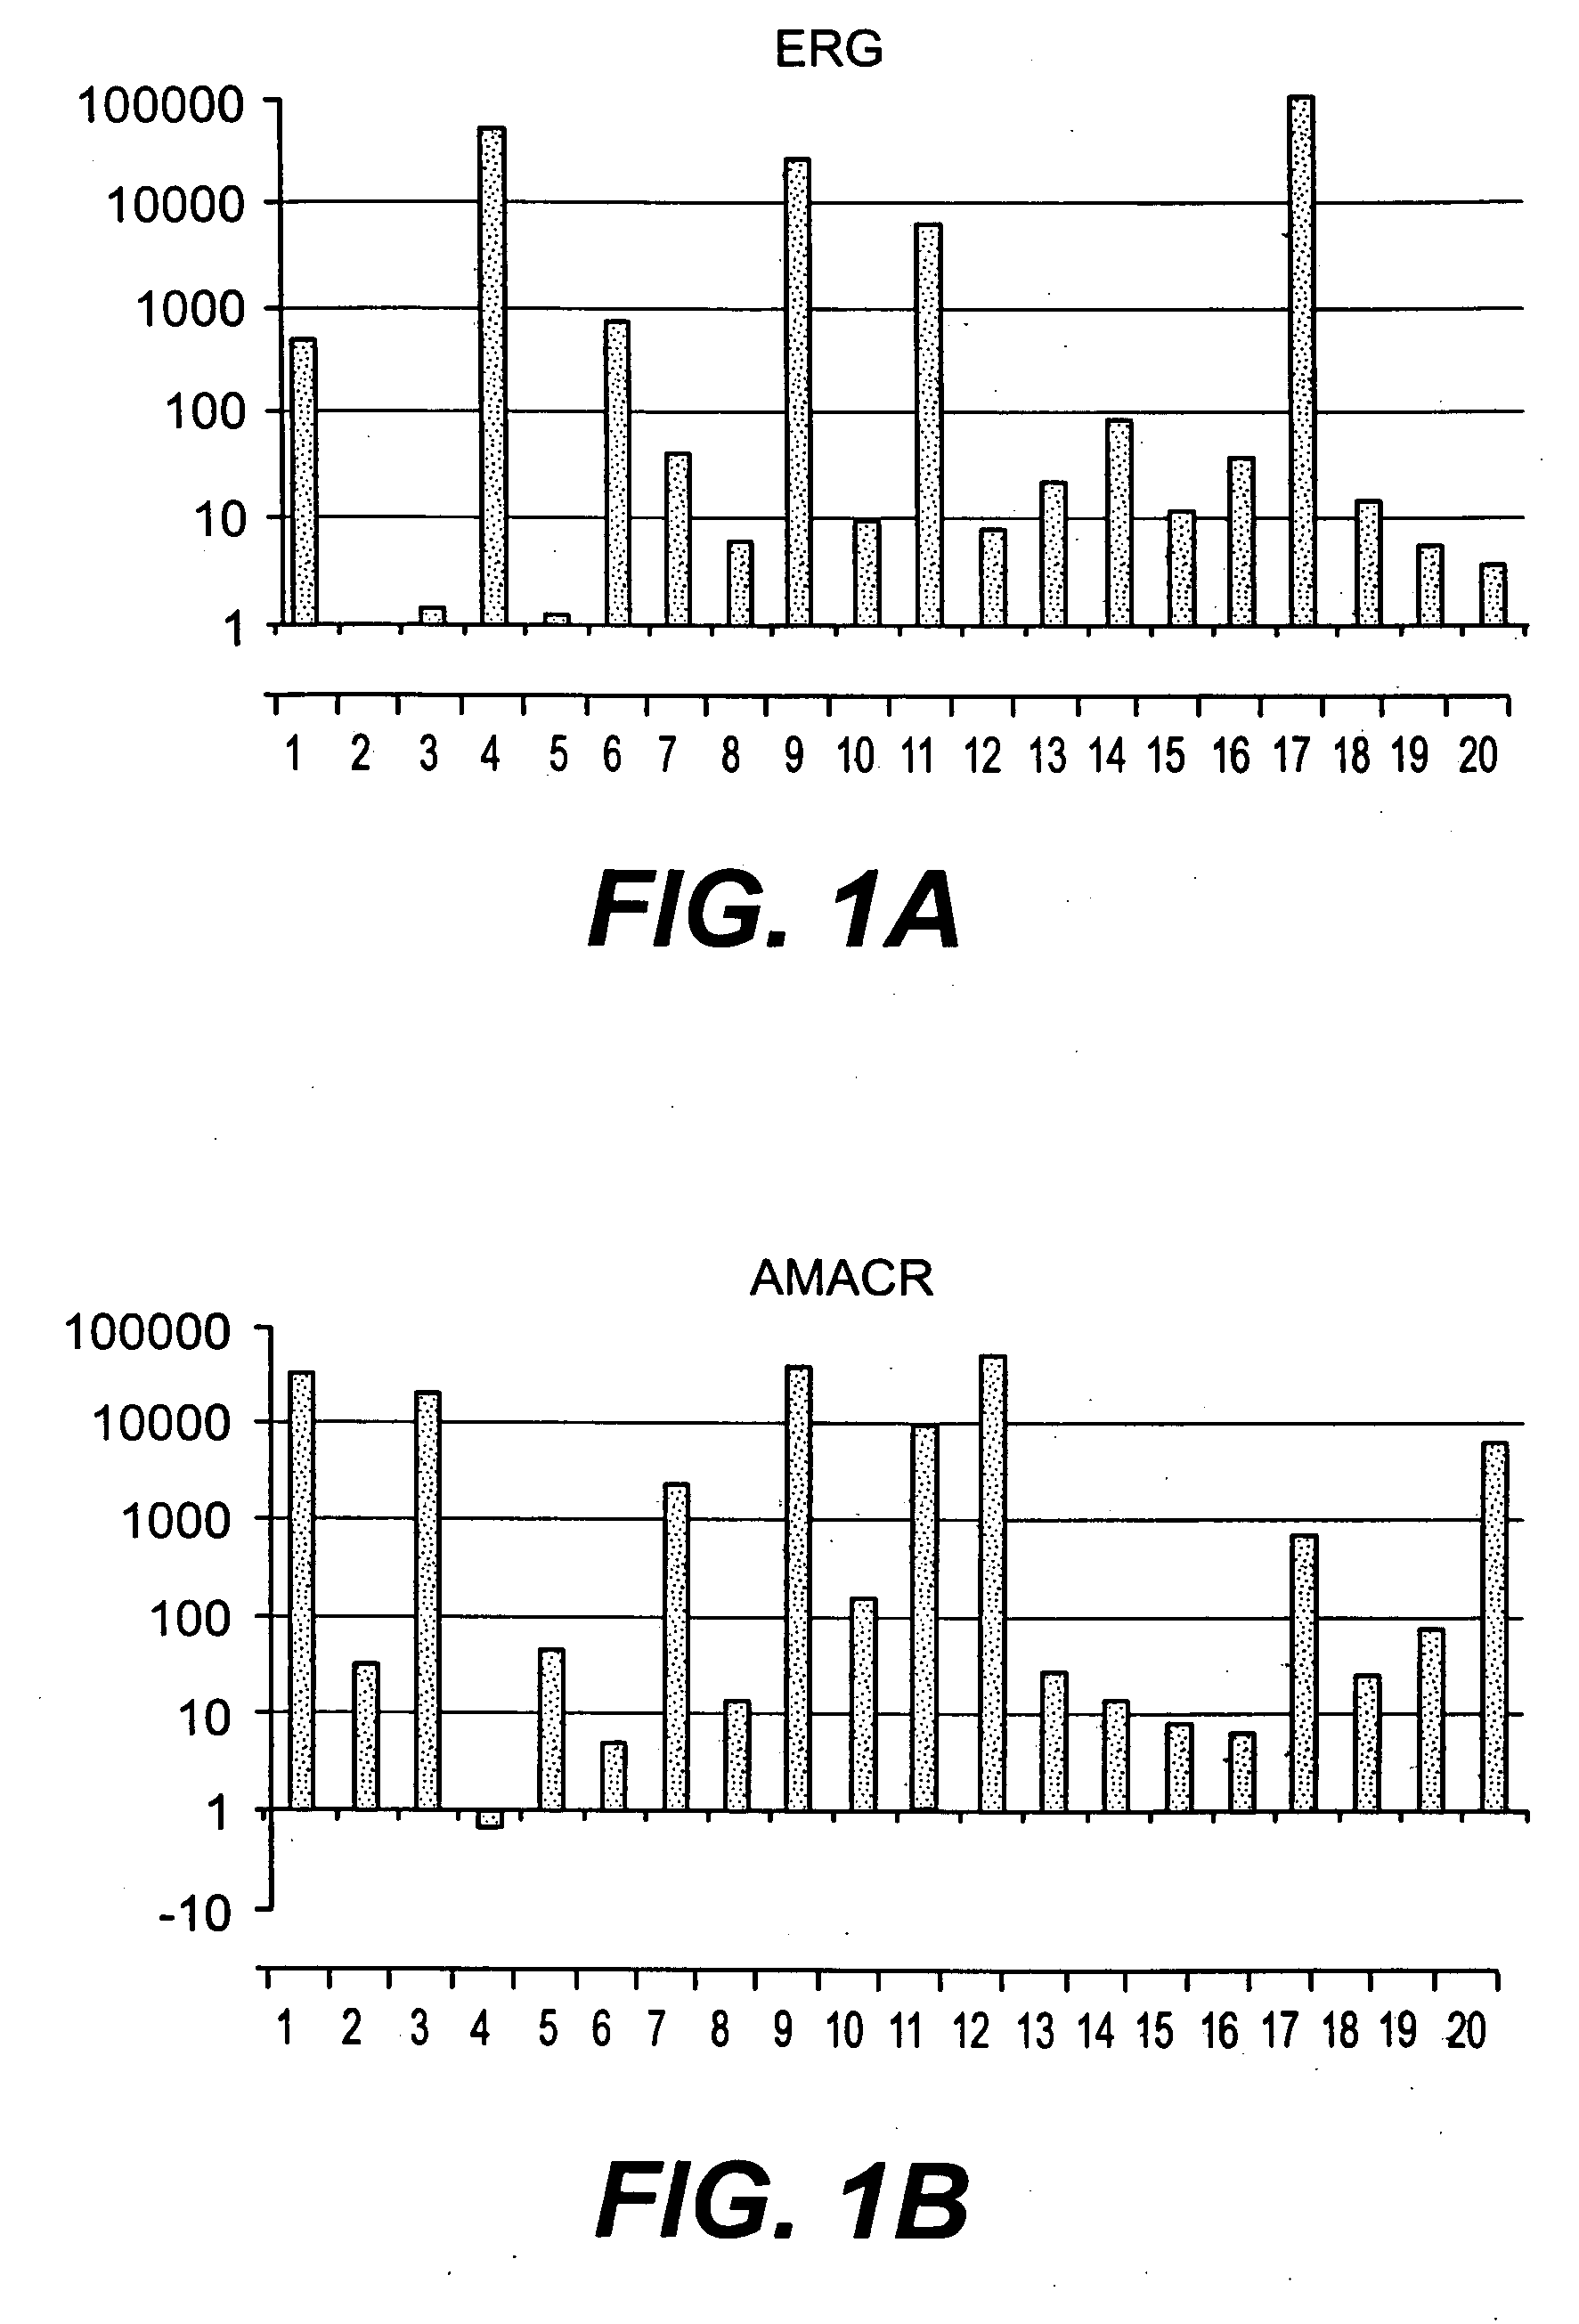 Methods of diagnosing or treating prostate cancer using the erg gene, alone or in combination with other over or under expressed genes in prostate cancer